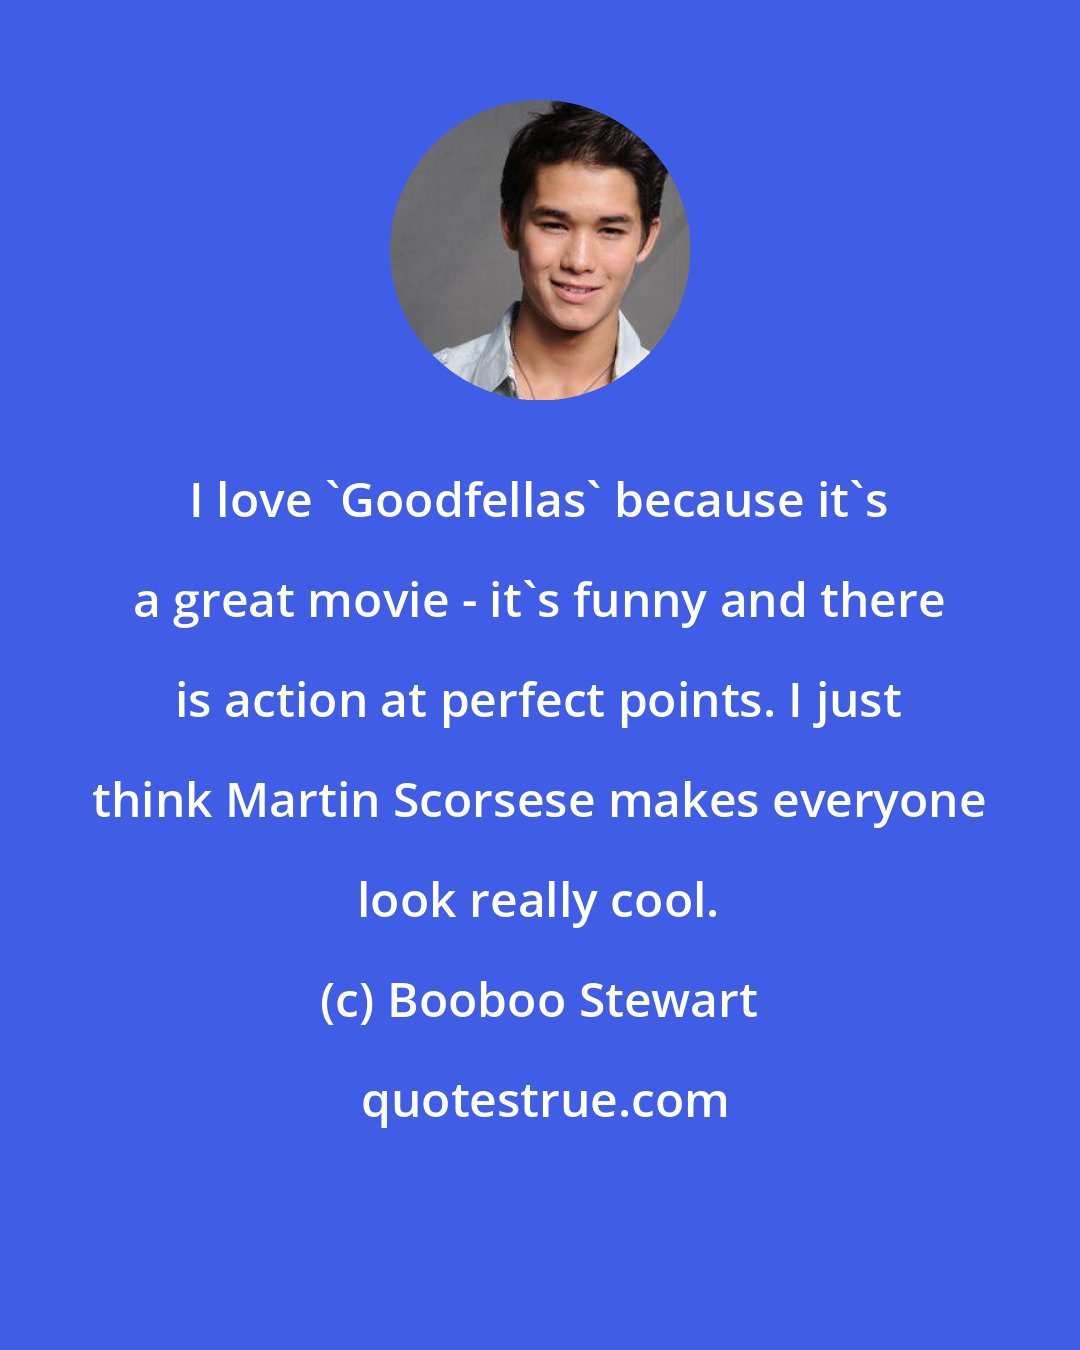 Booboo Stewart: I love 'Goodfellas' because it's a great movie - it's funny and there is action at perfect points. I just think Martin Scorsese makes everyone look really cool.